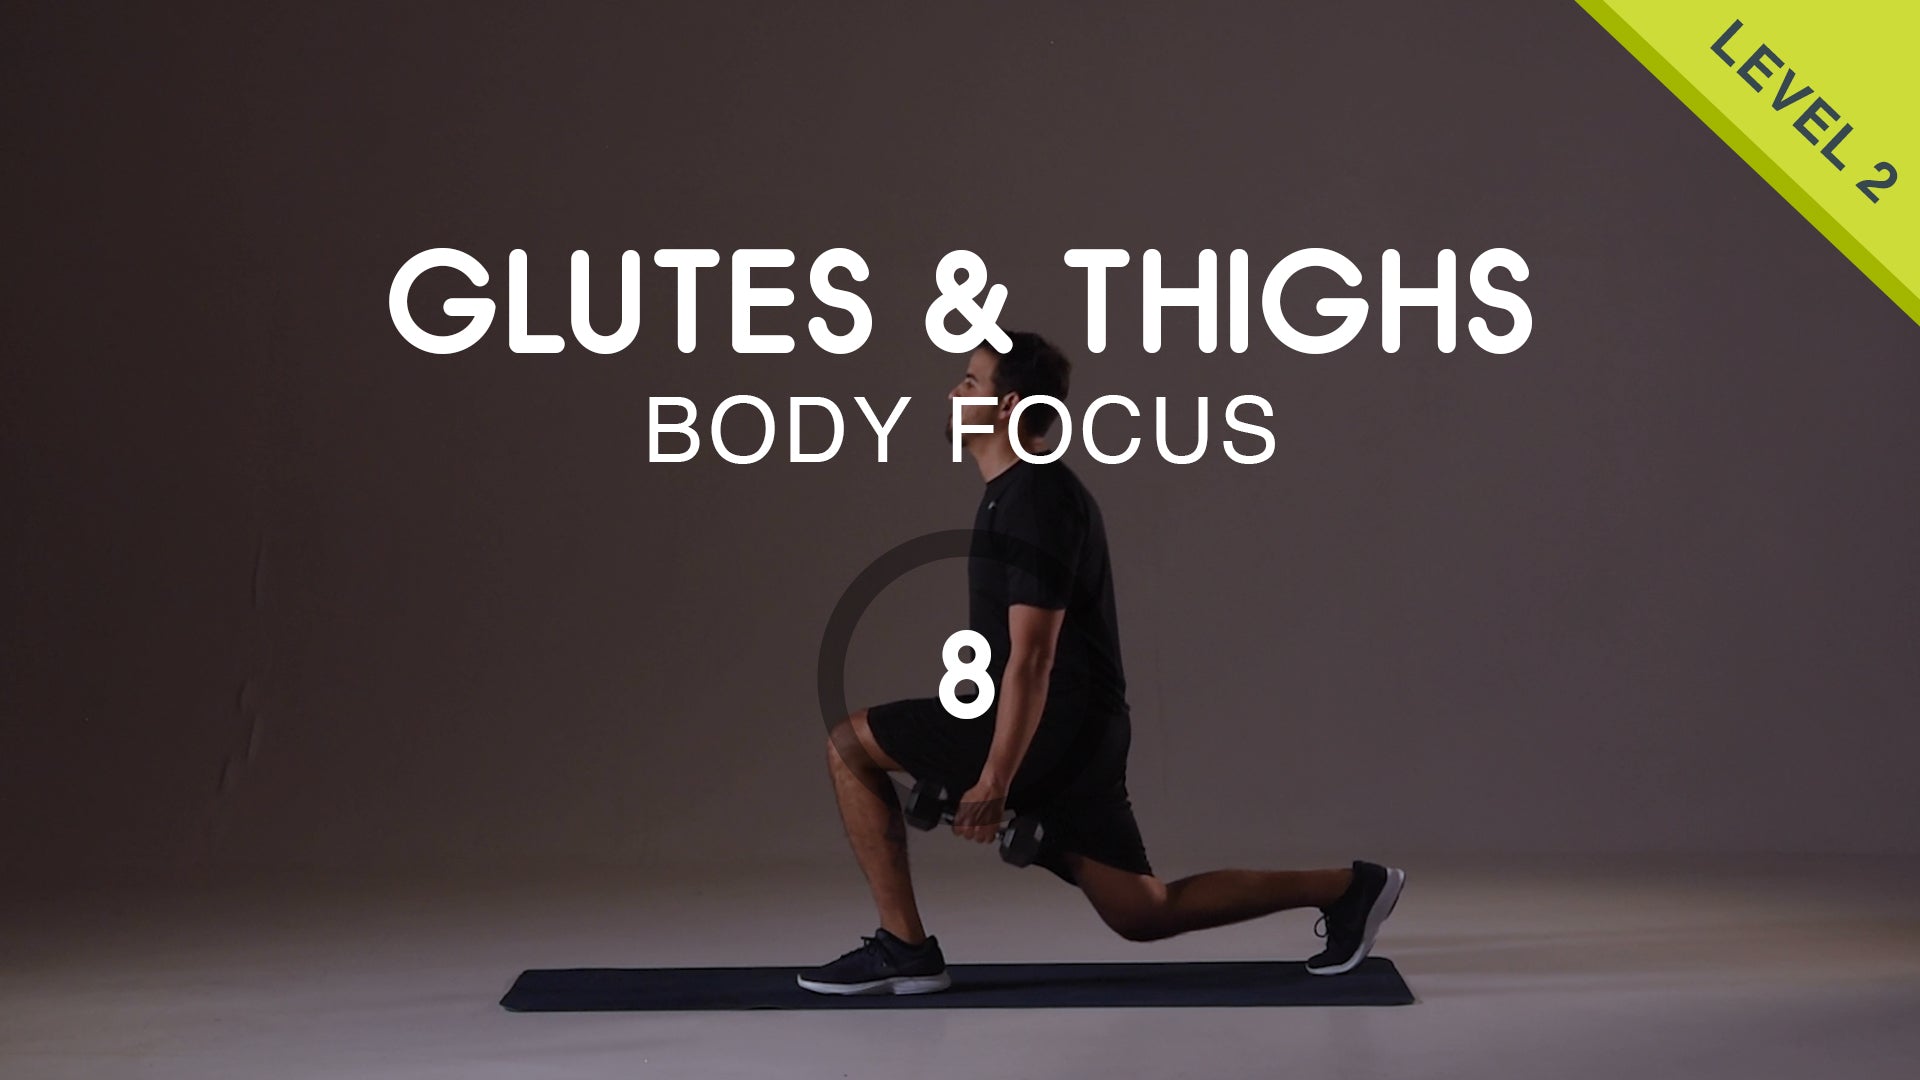 HIIT Workout Video - 10 min Glutes and Thighs Toner with Weights